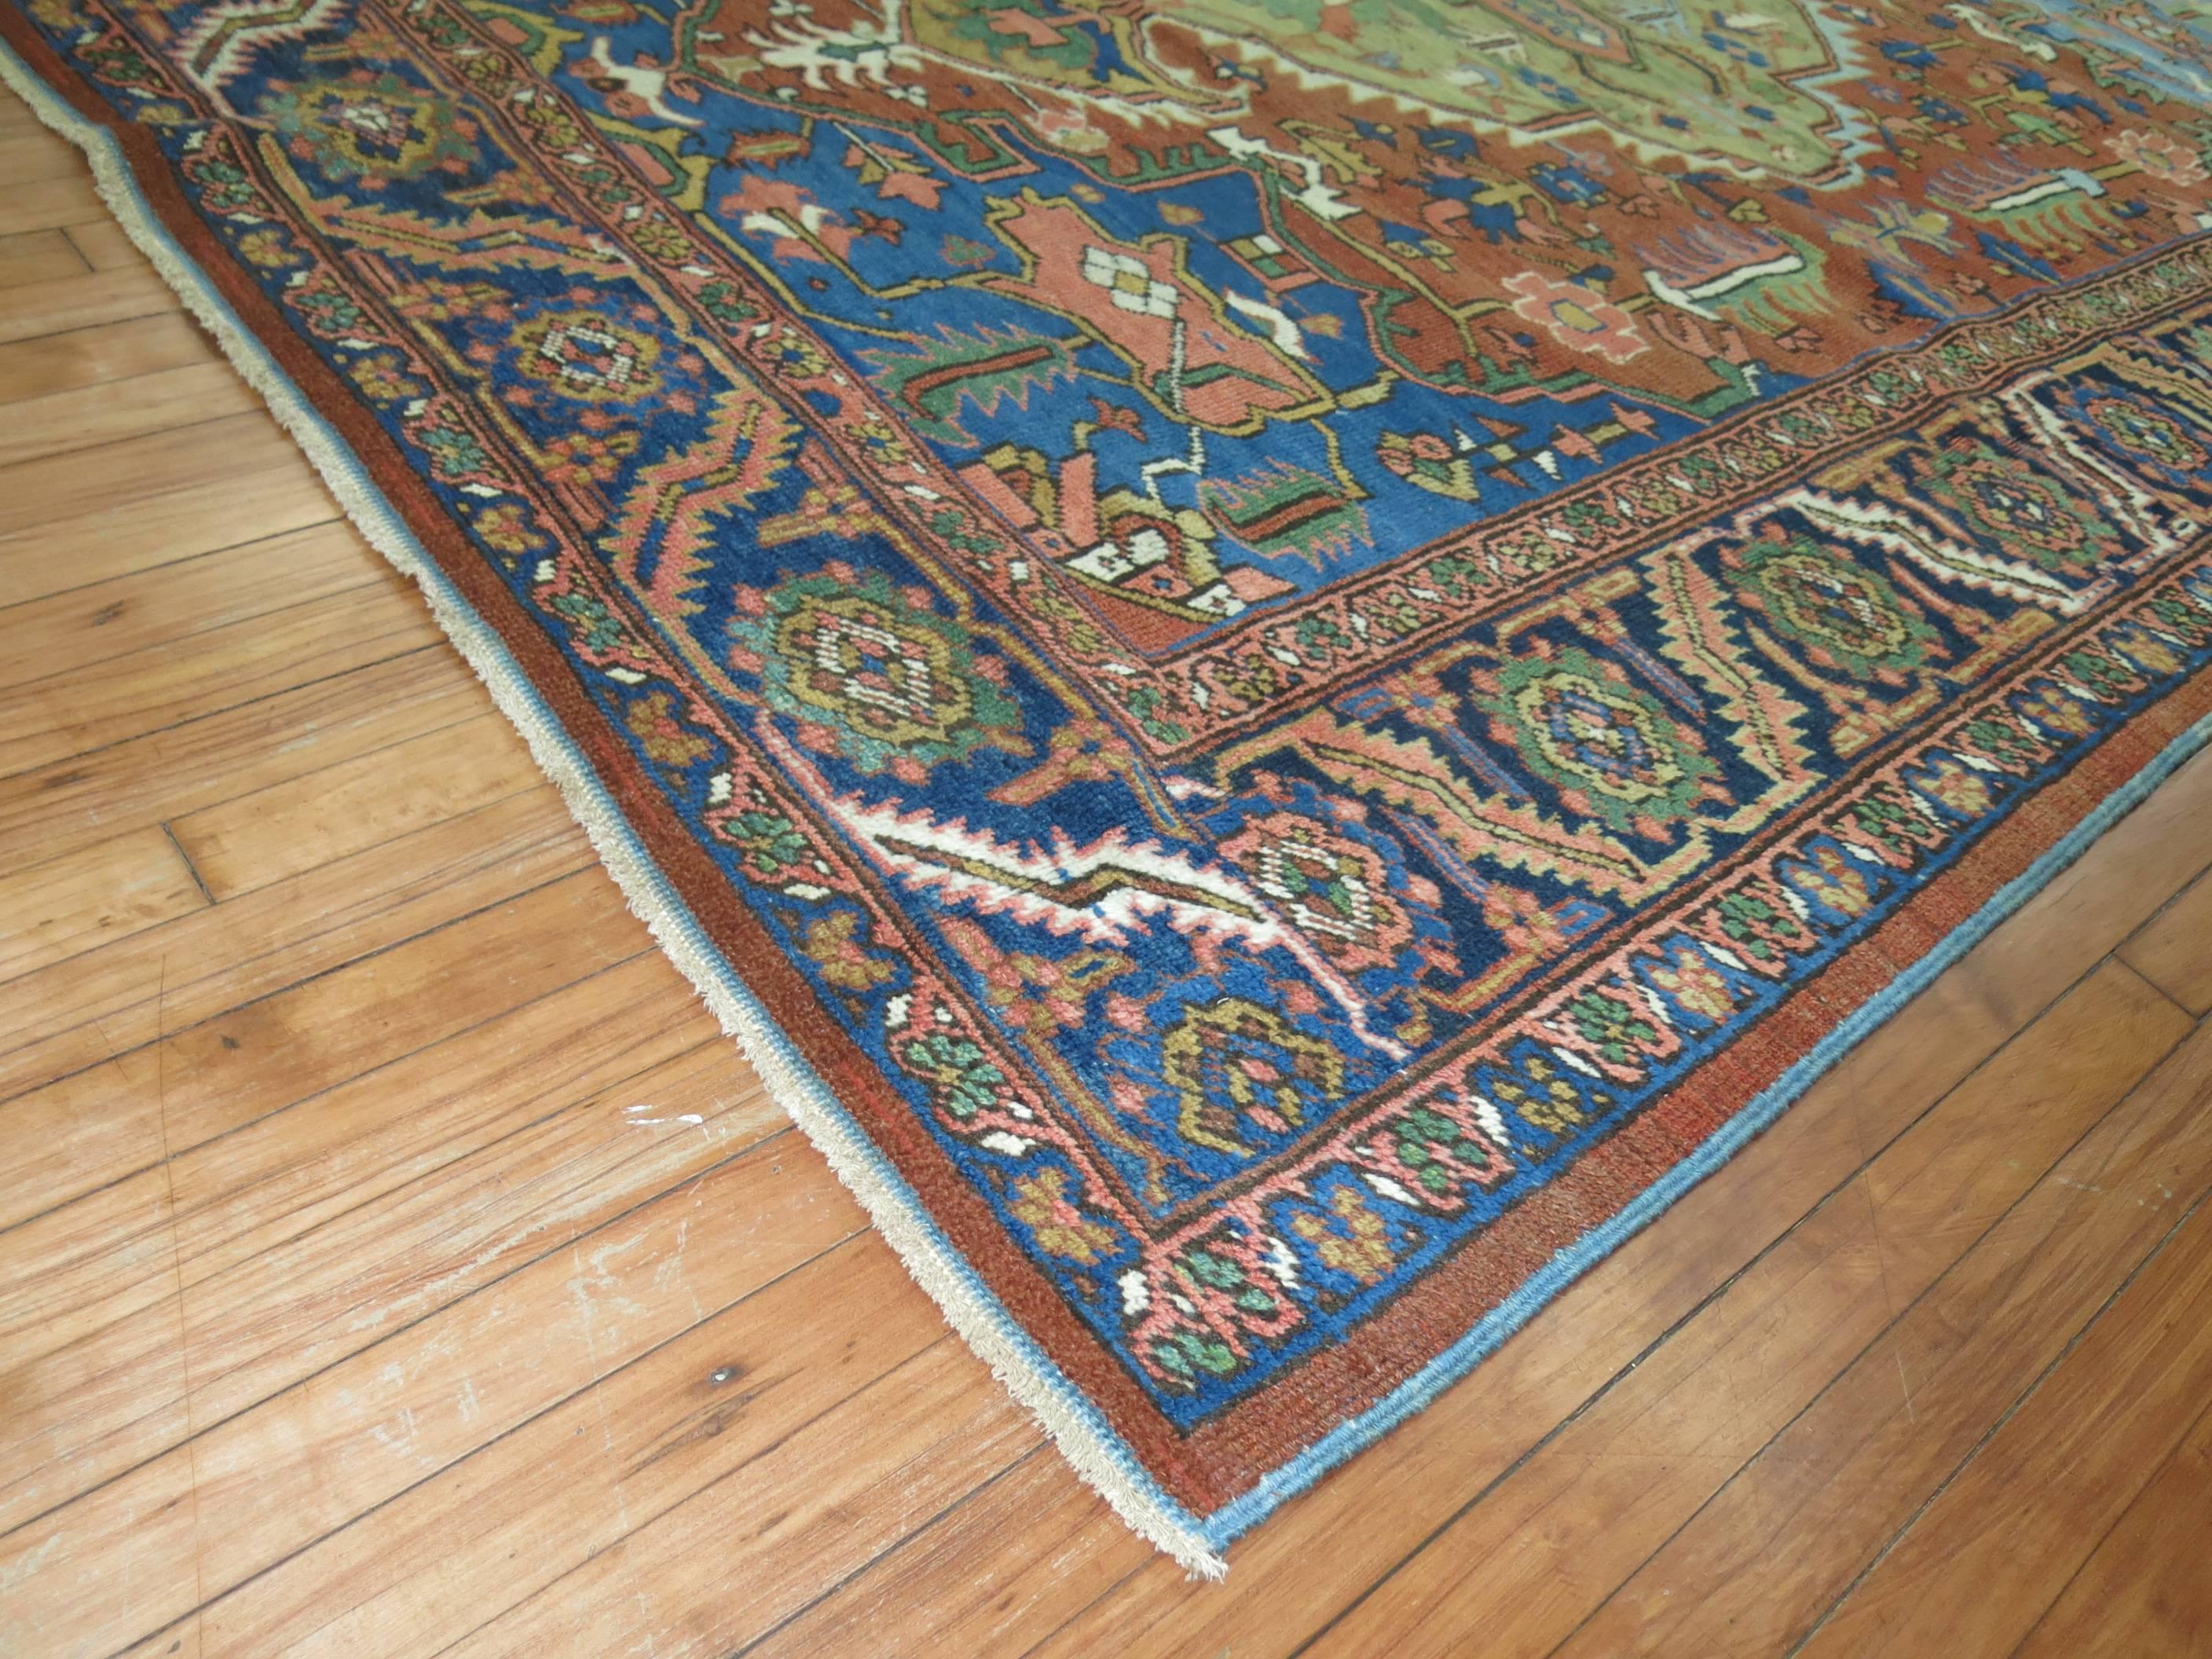 An antique Persian Heriz Carpet featuring a green medallion, orange field, blue border and predominant accents in rusts, terracotta and french blue.